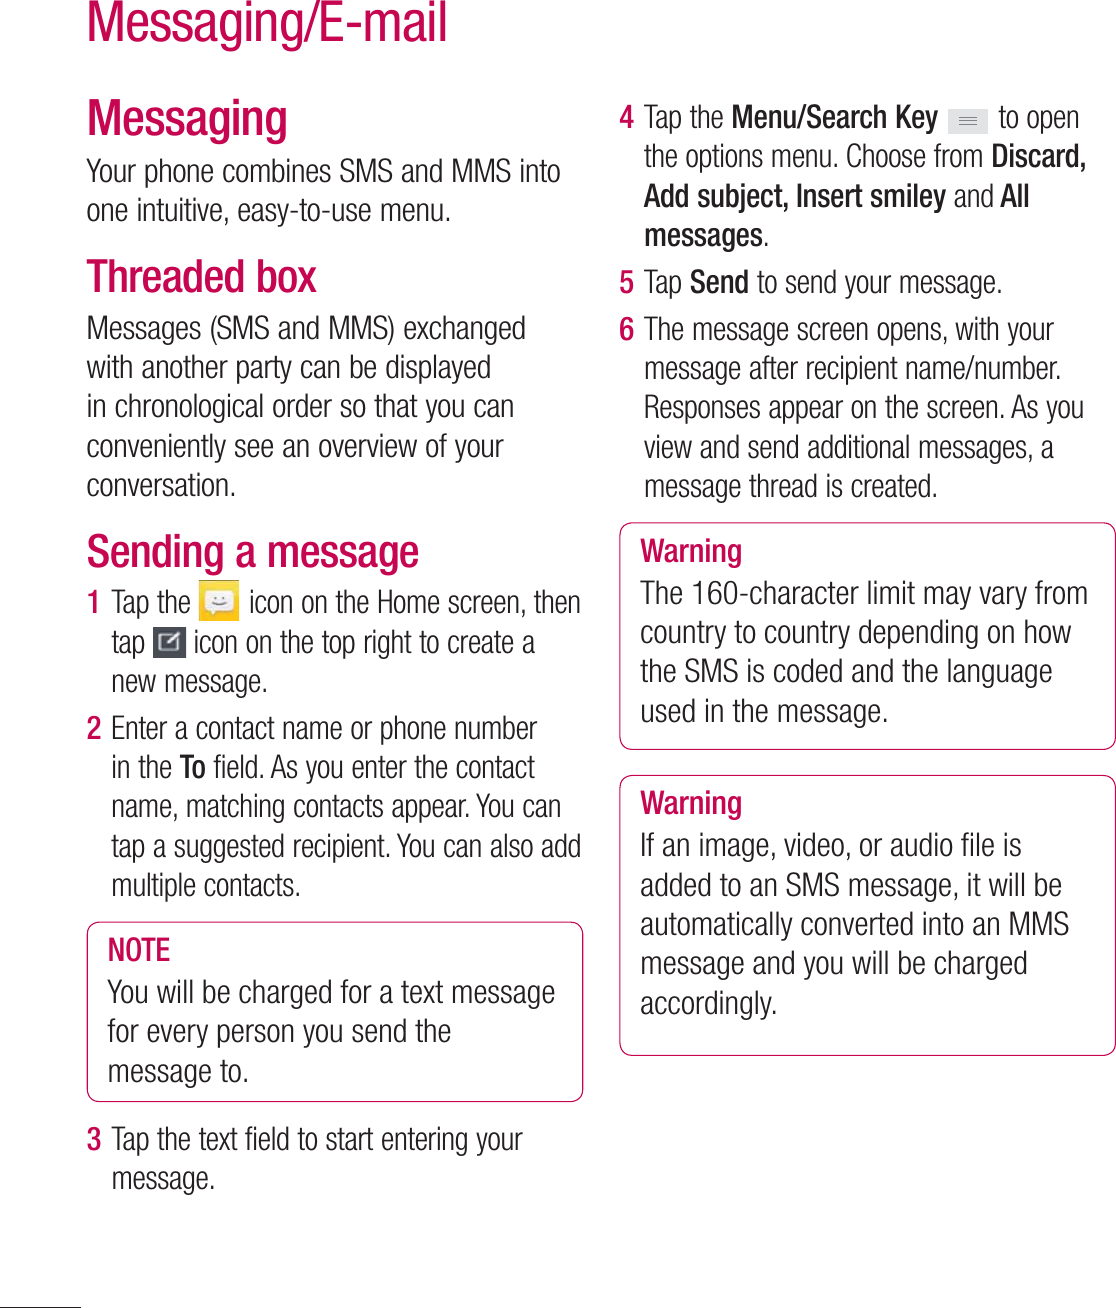 60MessagingYour phone combines SMS and MMS into one intuitive, easy-to-use menu.Threaded box Messages (SMS and MMS) exchanged with another party can be displayed in chronological order so that you can conveniently see an overview of your conversation.Sending a message1  Tap the   icon on the Home screen, then tap   icon on the top right to create a new message.2  Enter a contact name or phone number in the To field. As you enter the contact name, matching contacts appear. You can tap a suggested recipient. You can also add multiple contacts.NOTEYou will be charged for a text message for every person you send the message to.3  Tap the text field to start entering your message.4  Tap the Menu/Search Key   to open the options menu. Choose from Discard, Add subject, Insert smiley and All messages.5  Tap Send to send your message.6  The message screen opens, with your message after recipient name/number. Responses appear on the screen. As you view and send additional messages, a message thread is created.WarningThe 160-character limit may vary from country to country depending on how the SMS is coded and the language used in the message.WarningIf an image, video, or audio ﬁ le is added to an SMS message, it will be automatically converted into an MMS message and you will be charged accordingly.Messaging/E-mail